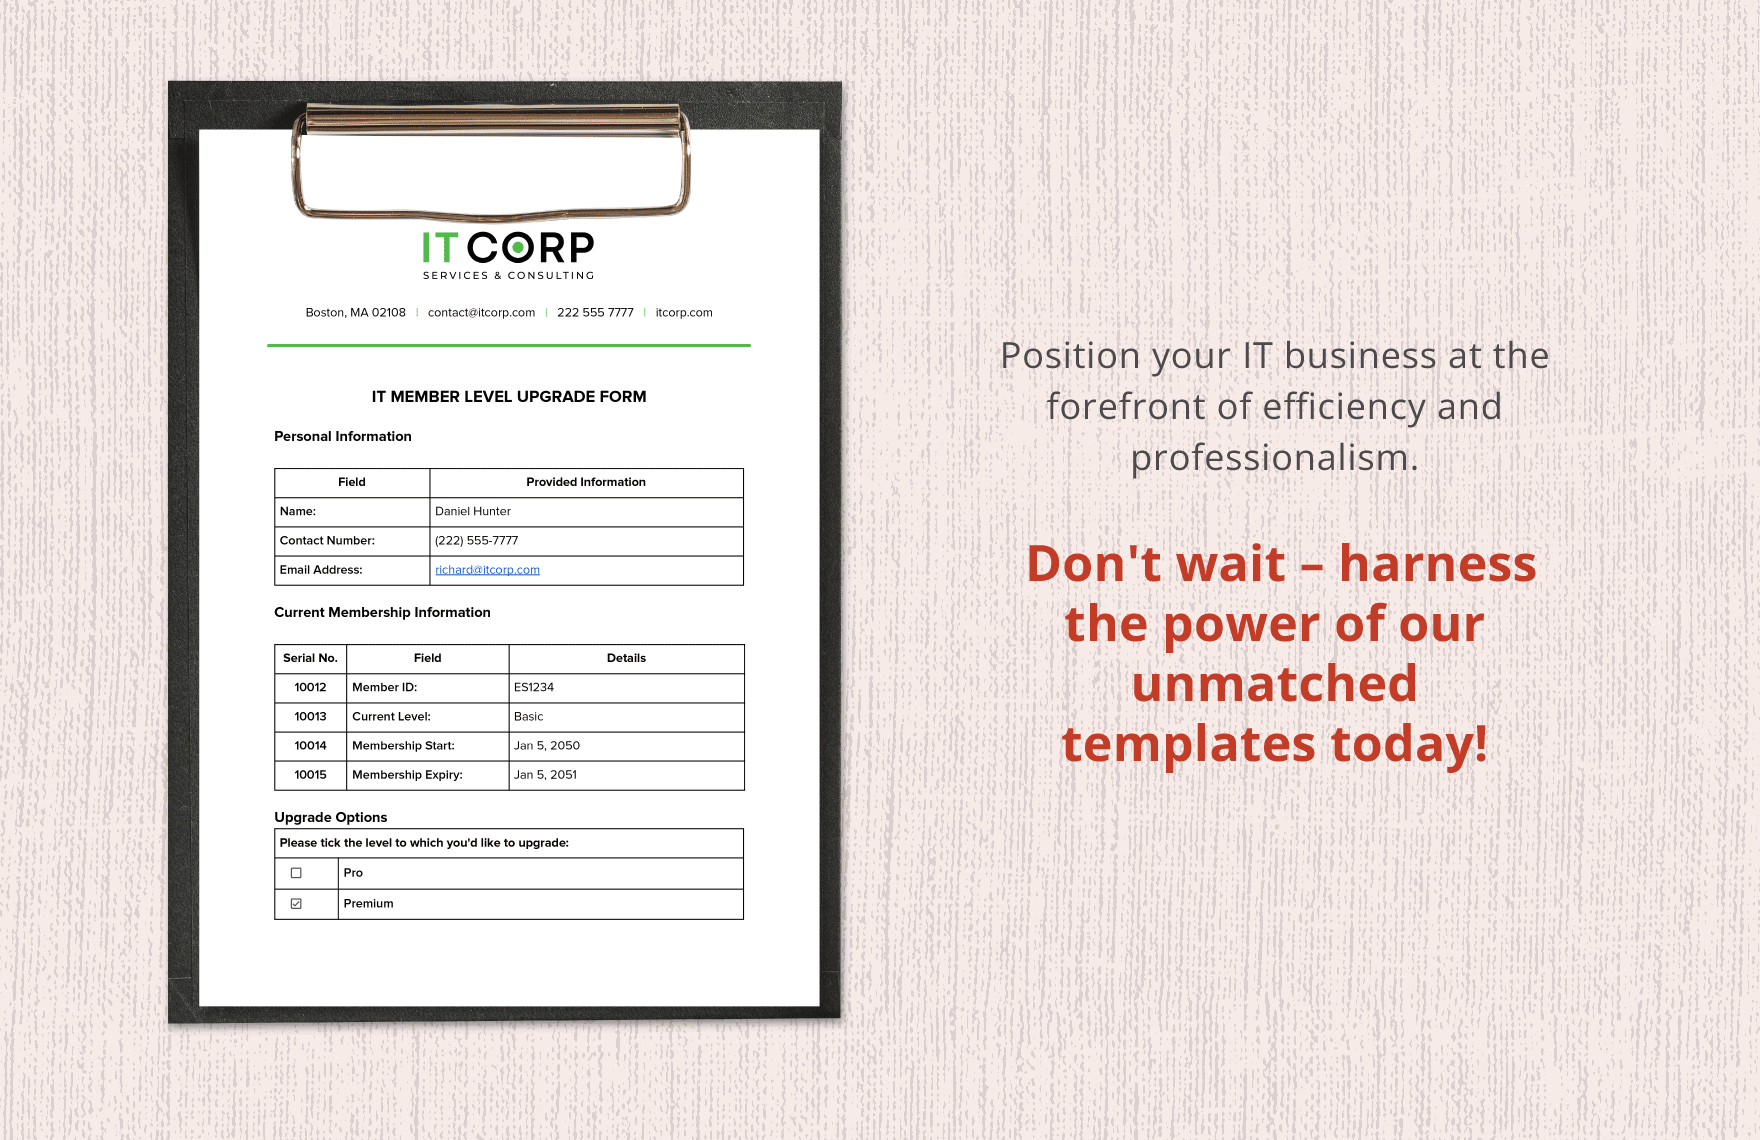 IT Member Level Upgrade Form Template